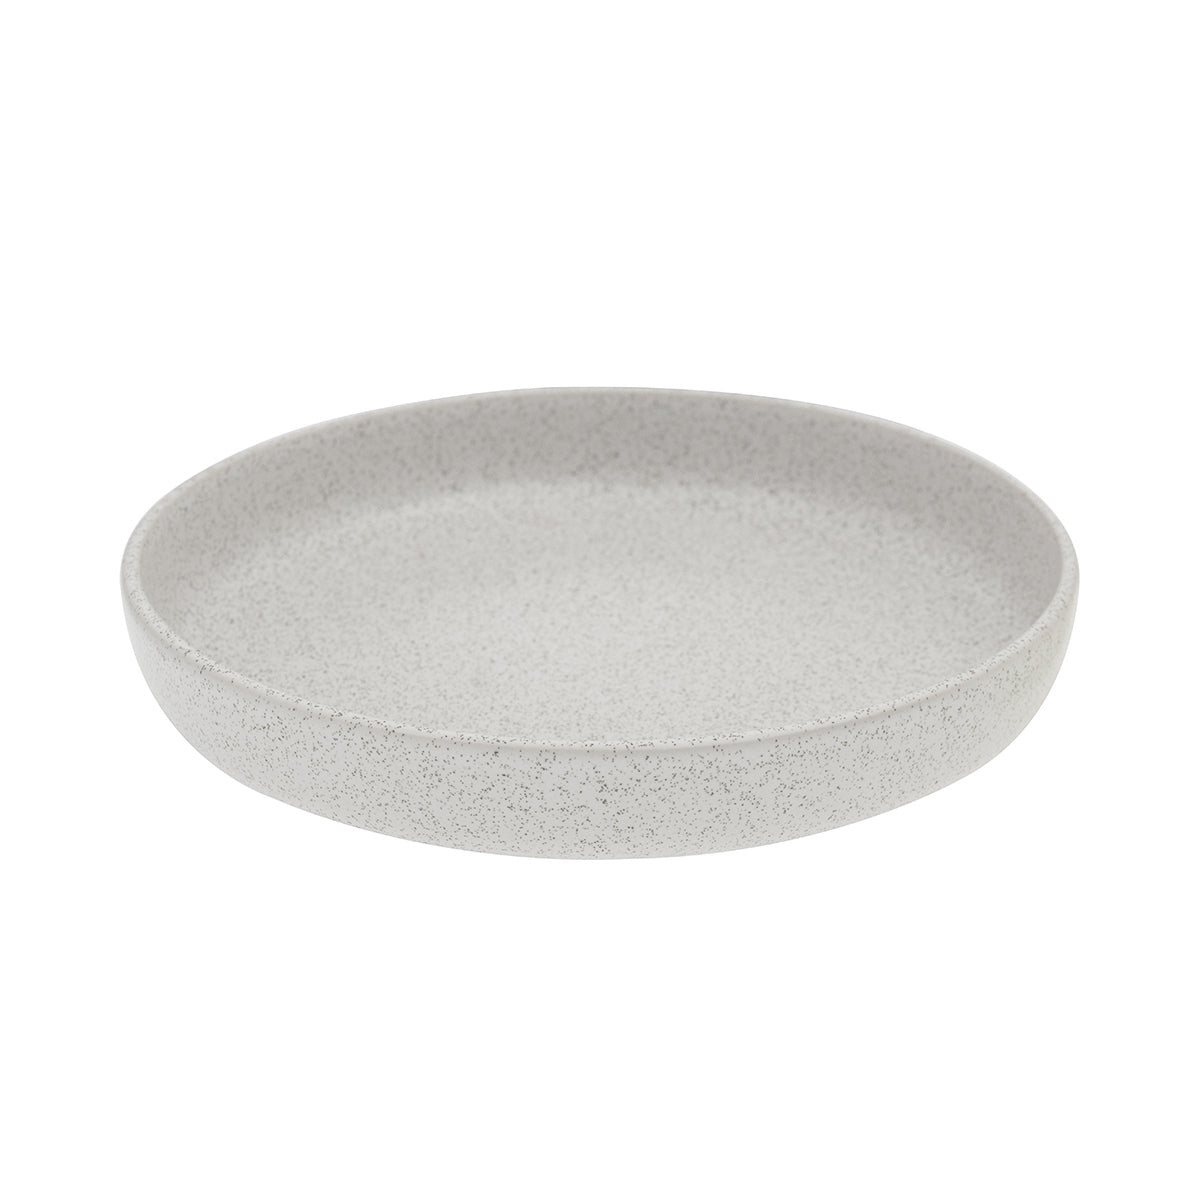 DEEP PLATE - 280mm, Ease Clay